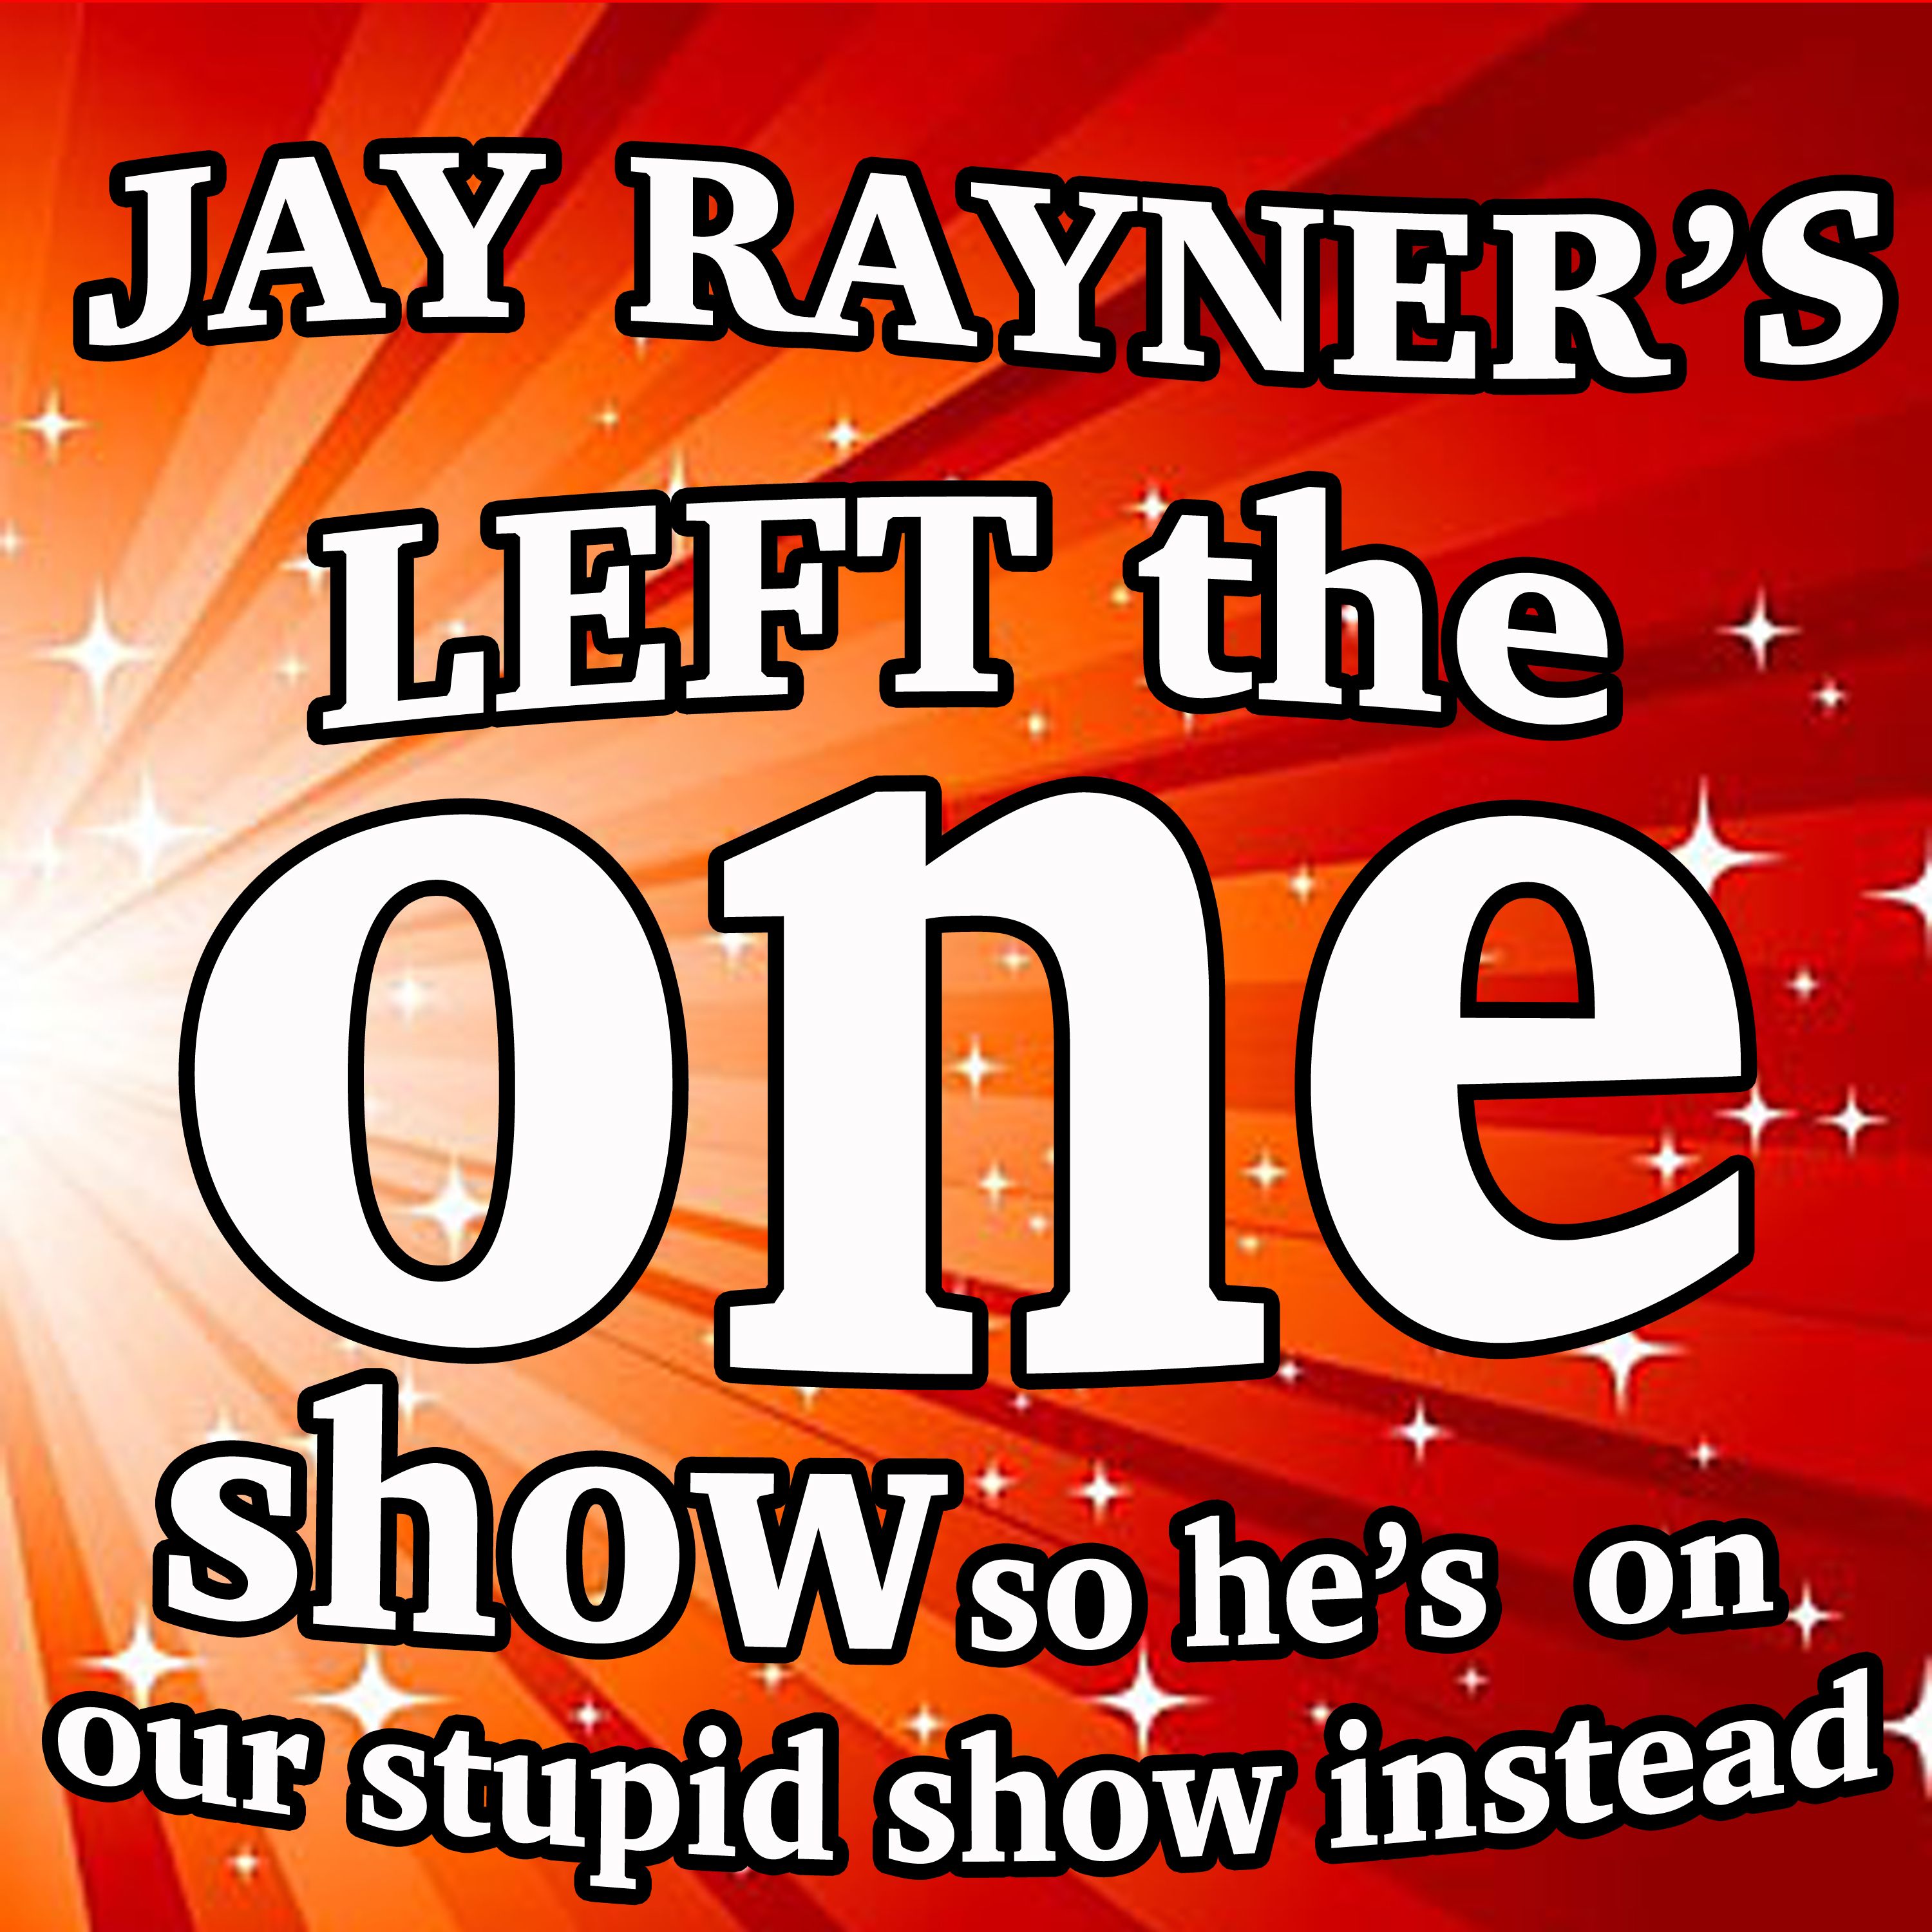 Episode 8: Jay Rayner Is A Free Man, Tommy Steele's Boat of Death and Your Dad's Racist